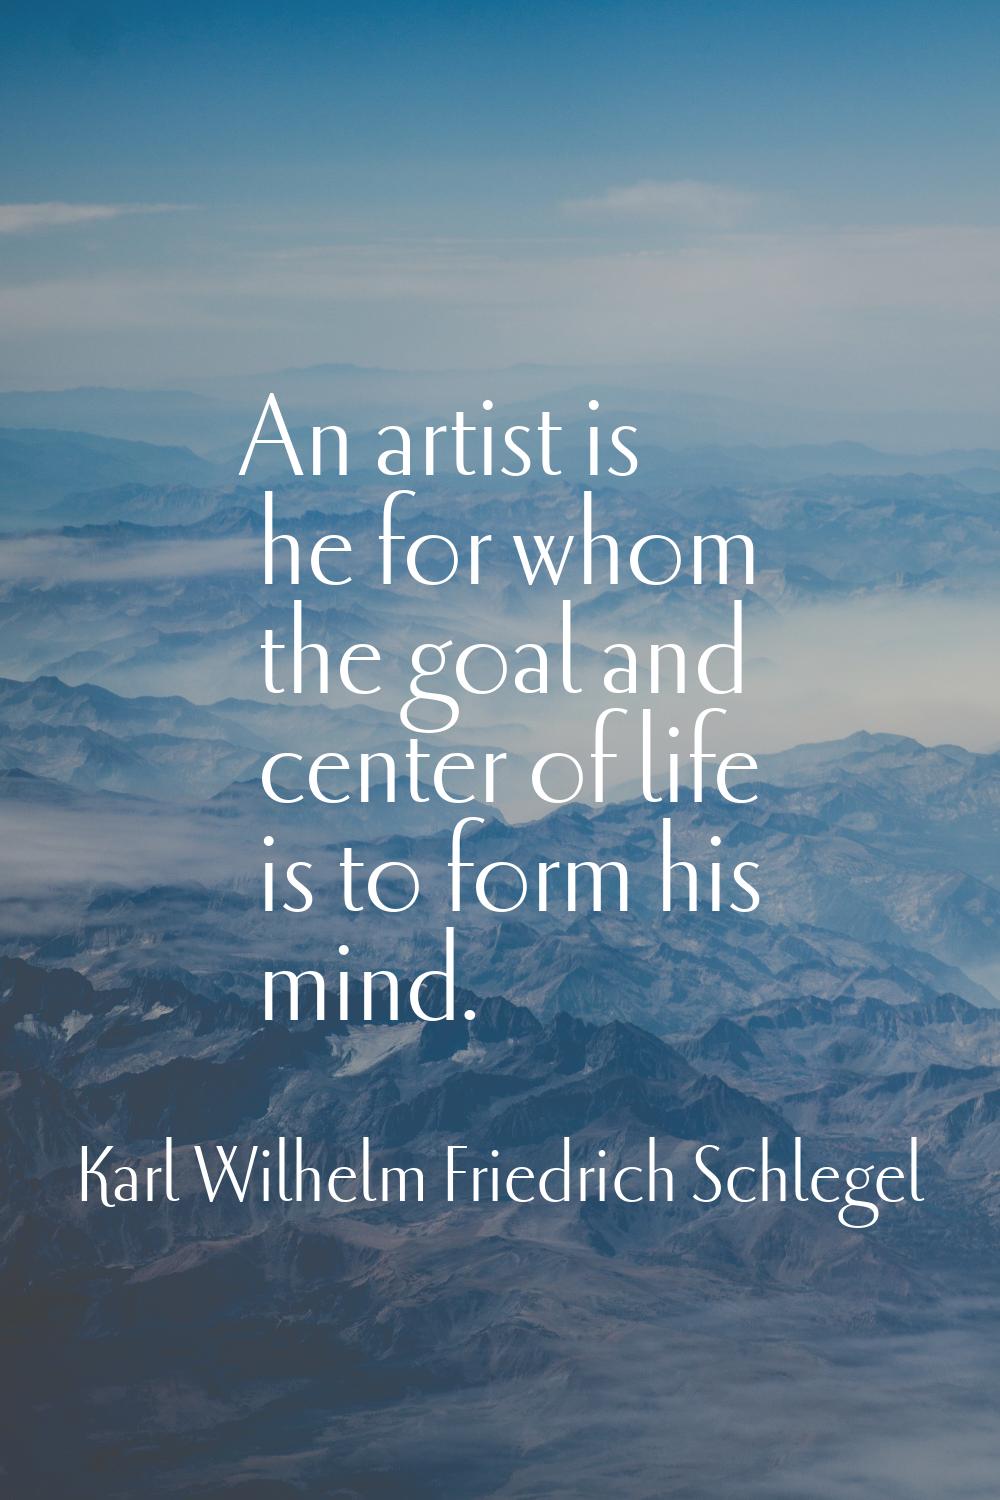 An artist is he for whom the goal and center of life is to form his mind.